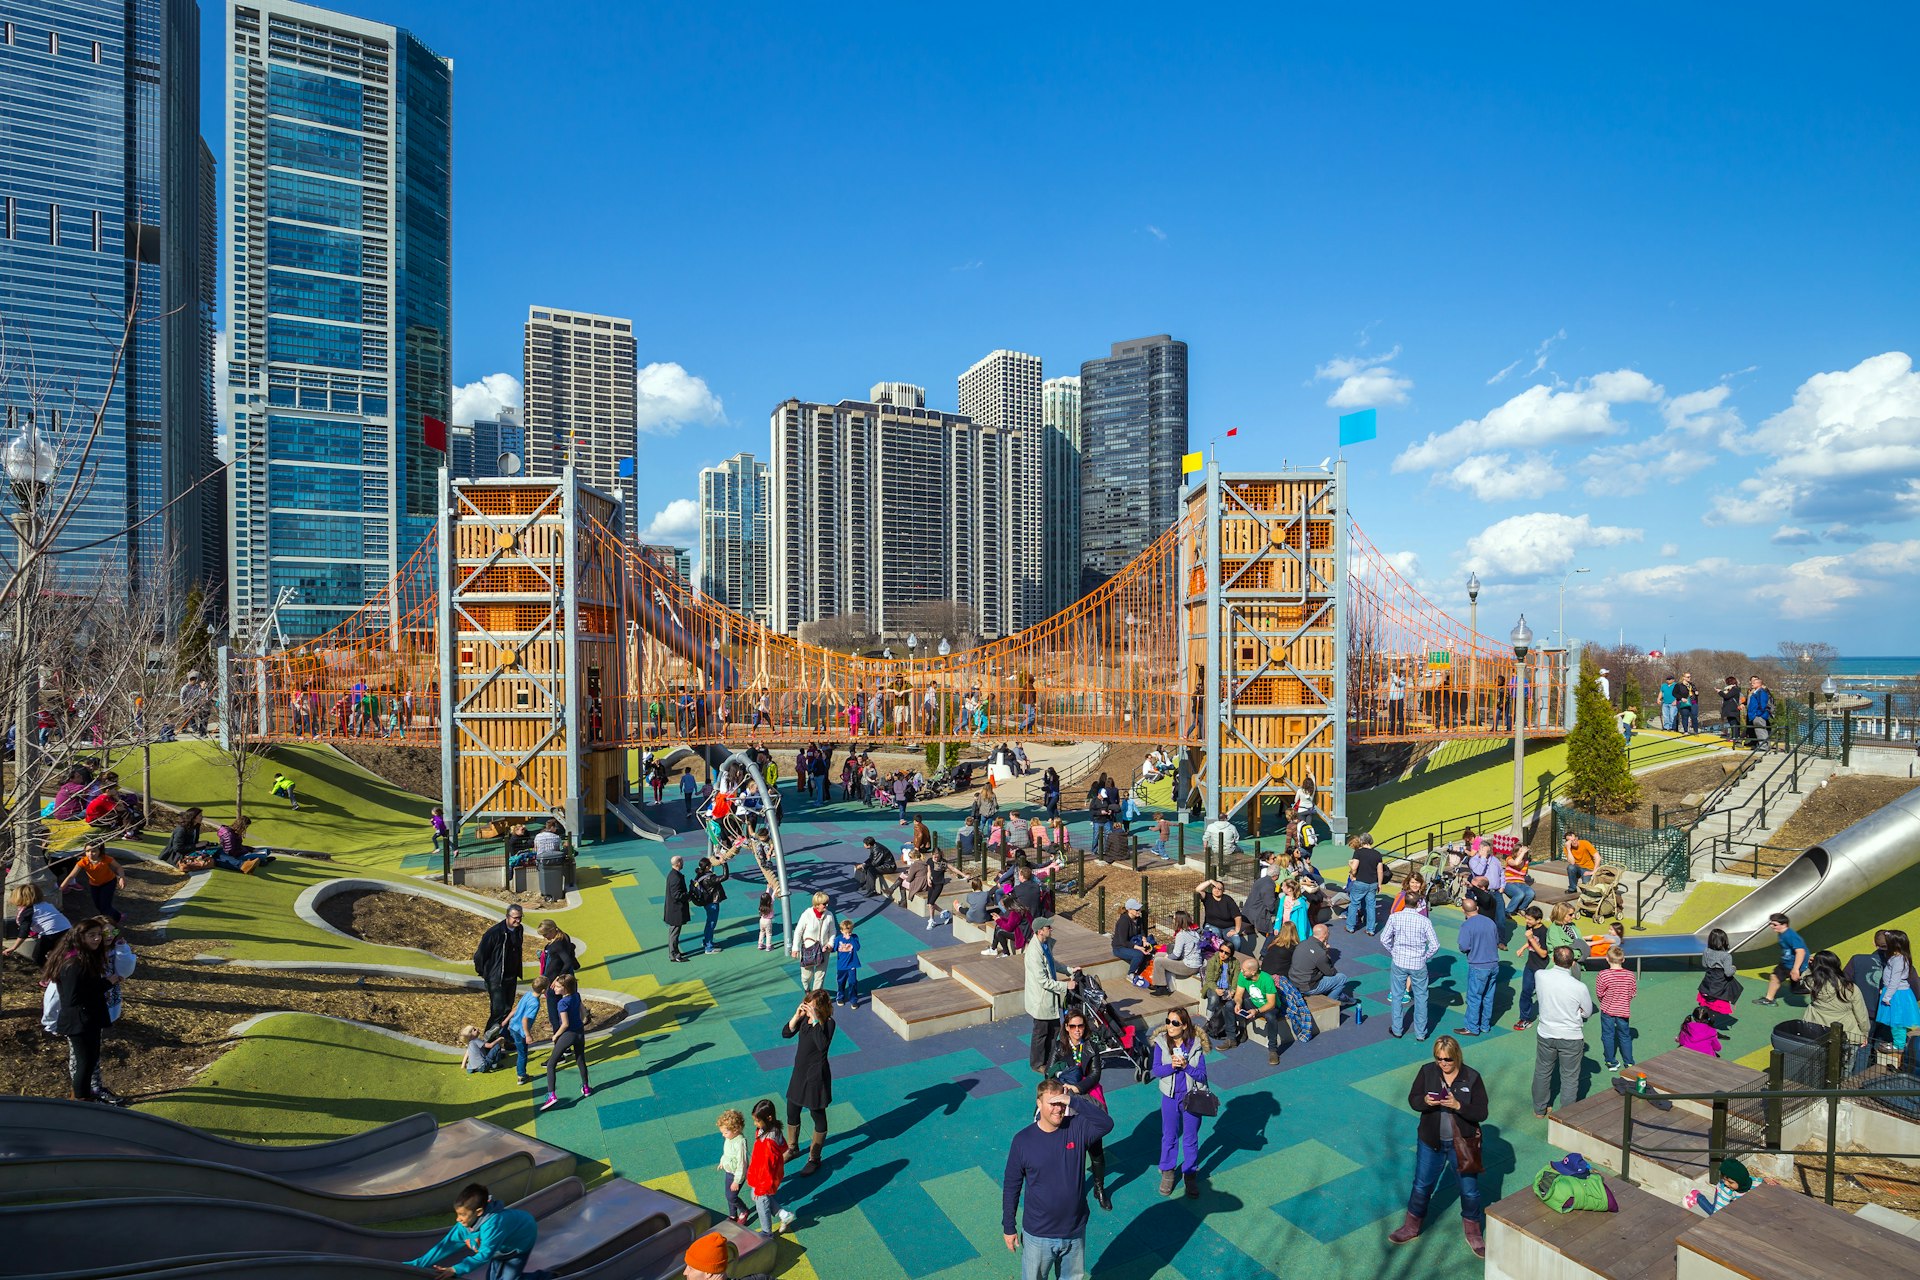 Playground at Maggie Daley Park, Chicago